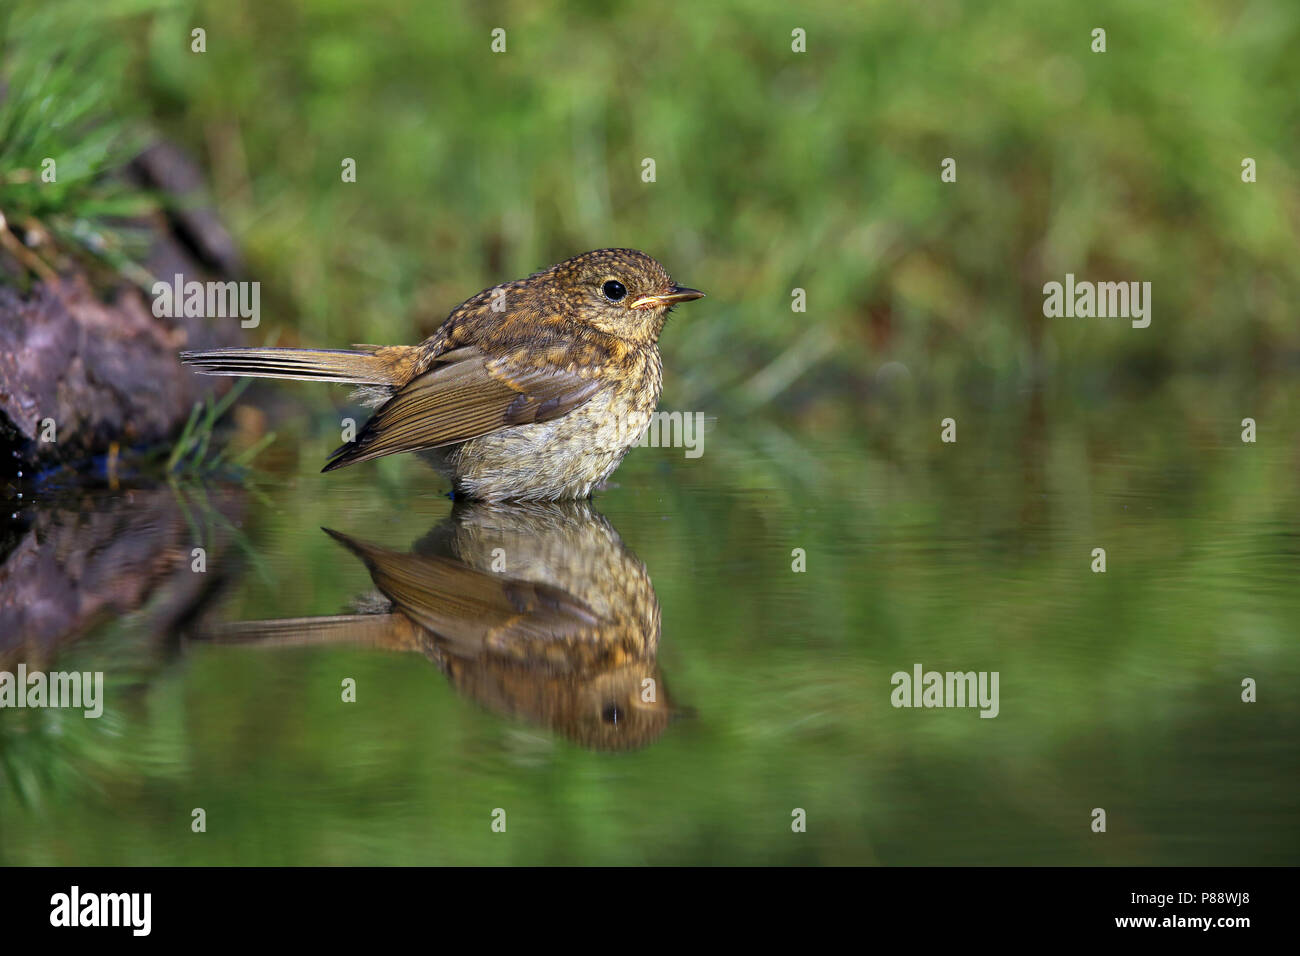 Immature European Robin standing in water in the Netherlands Stock Photo